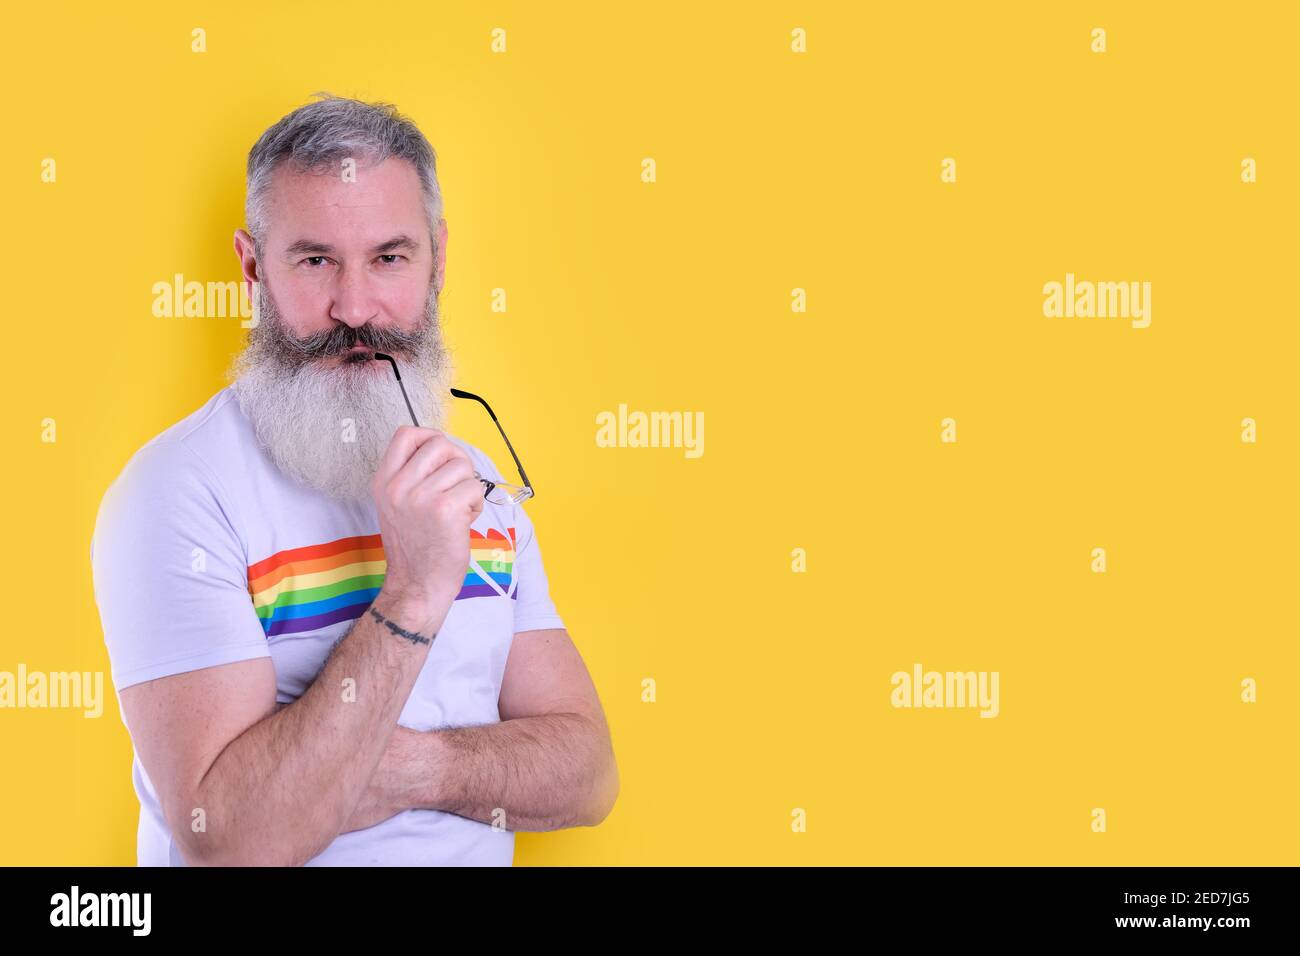 Mature bearded man dressed with lgbtq symbols t-shirt looking at camera, studio portrait of homosexual man, yellow background Stock Photo